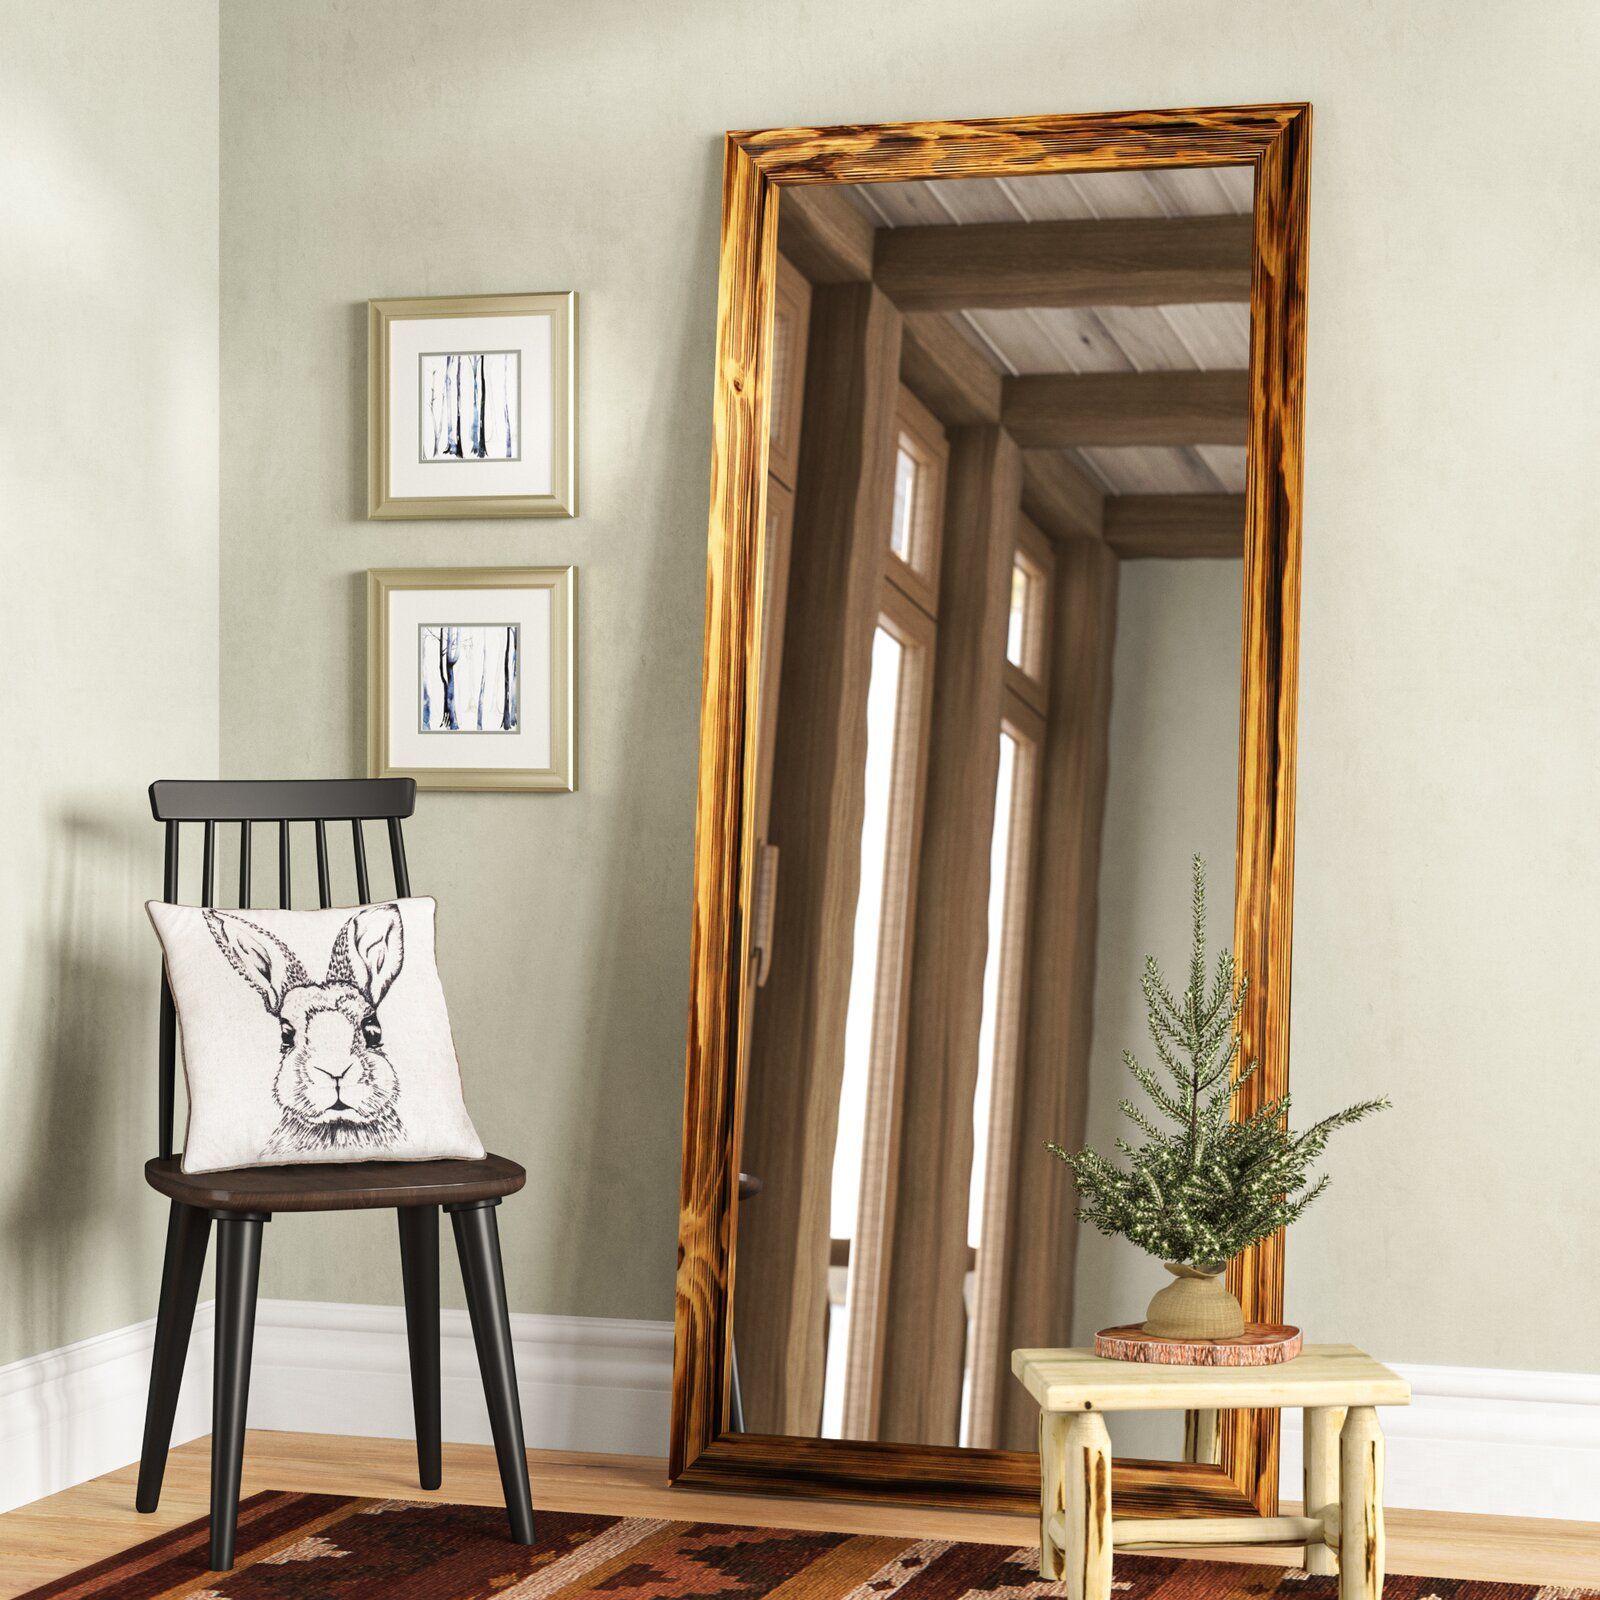 Cairo Platinum Gold Decorative Wall Mirror | Rustic Full Length Mirror In Tellier Accent Wall Mirrors (View 14 of 15)